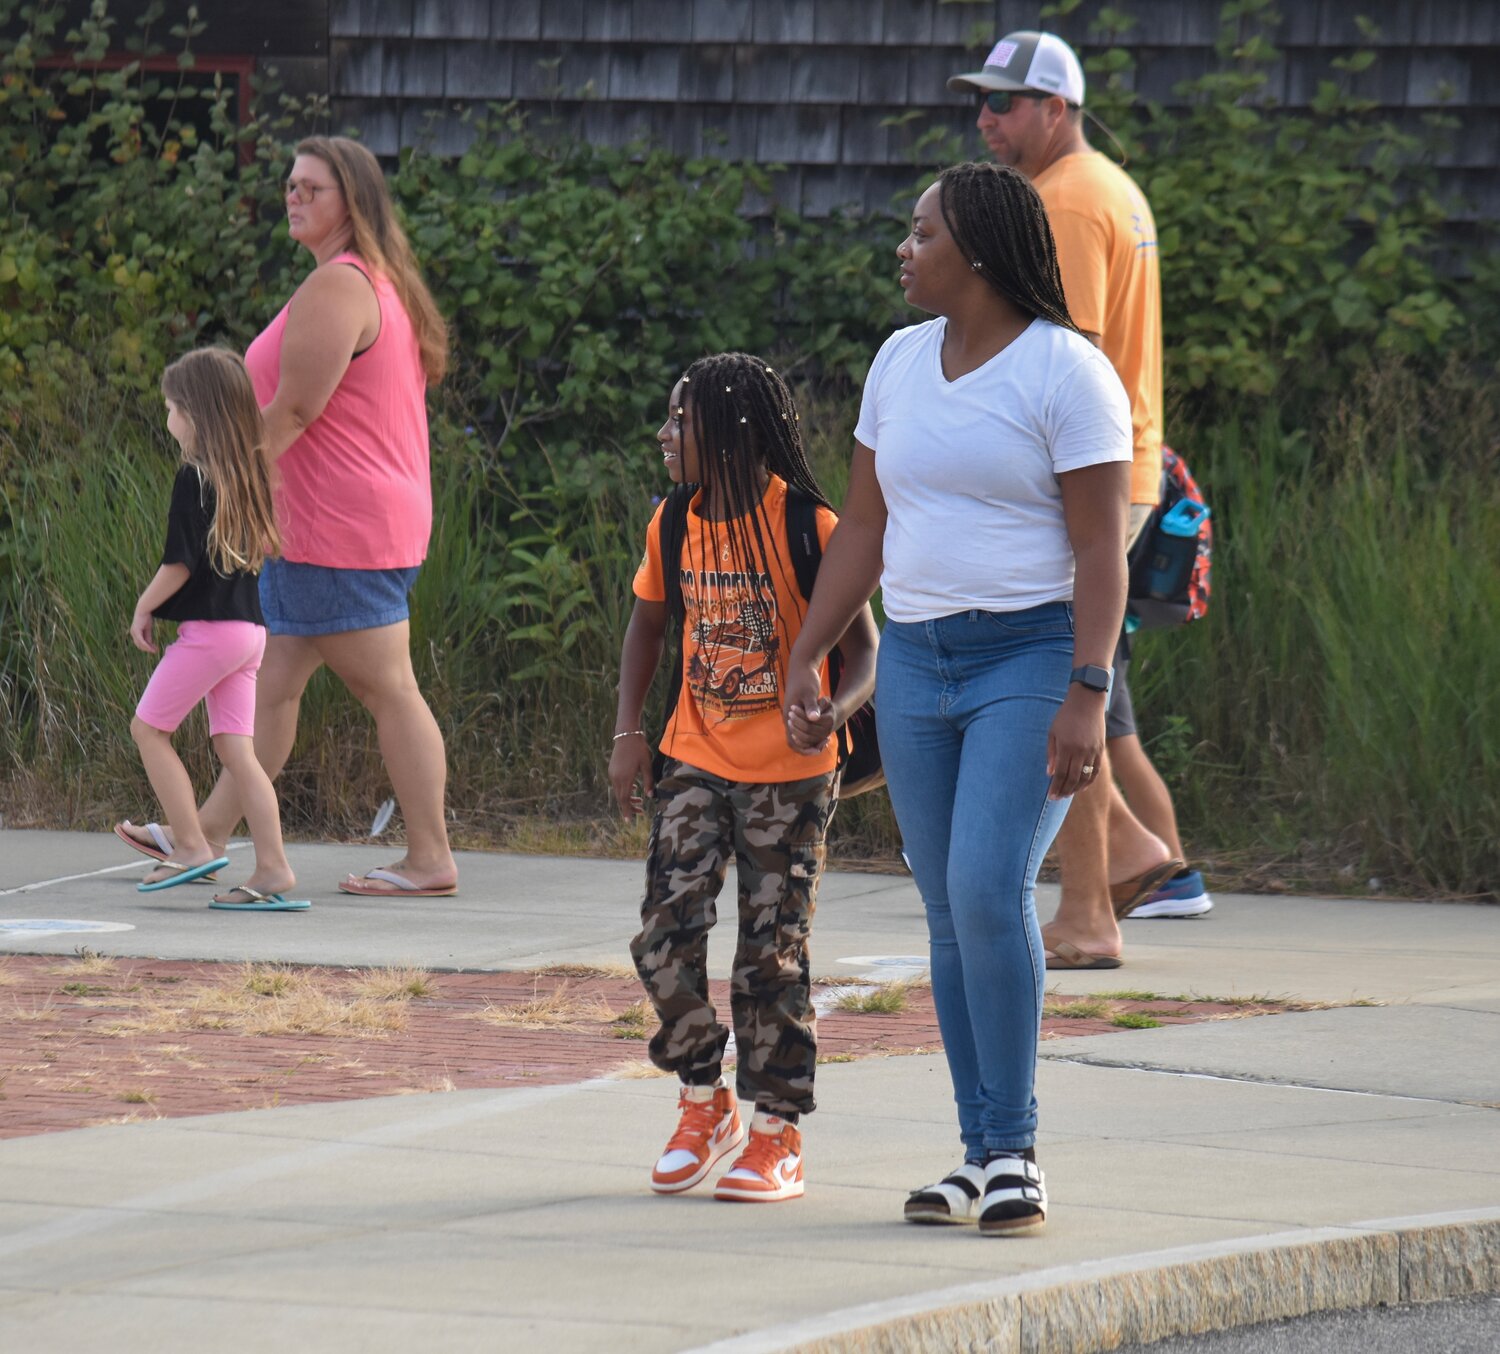 Nantucket Public Schools staff welcomed students as they returned to campus for the first day of school Tuesday morning.